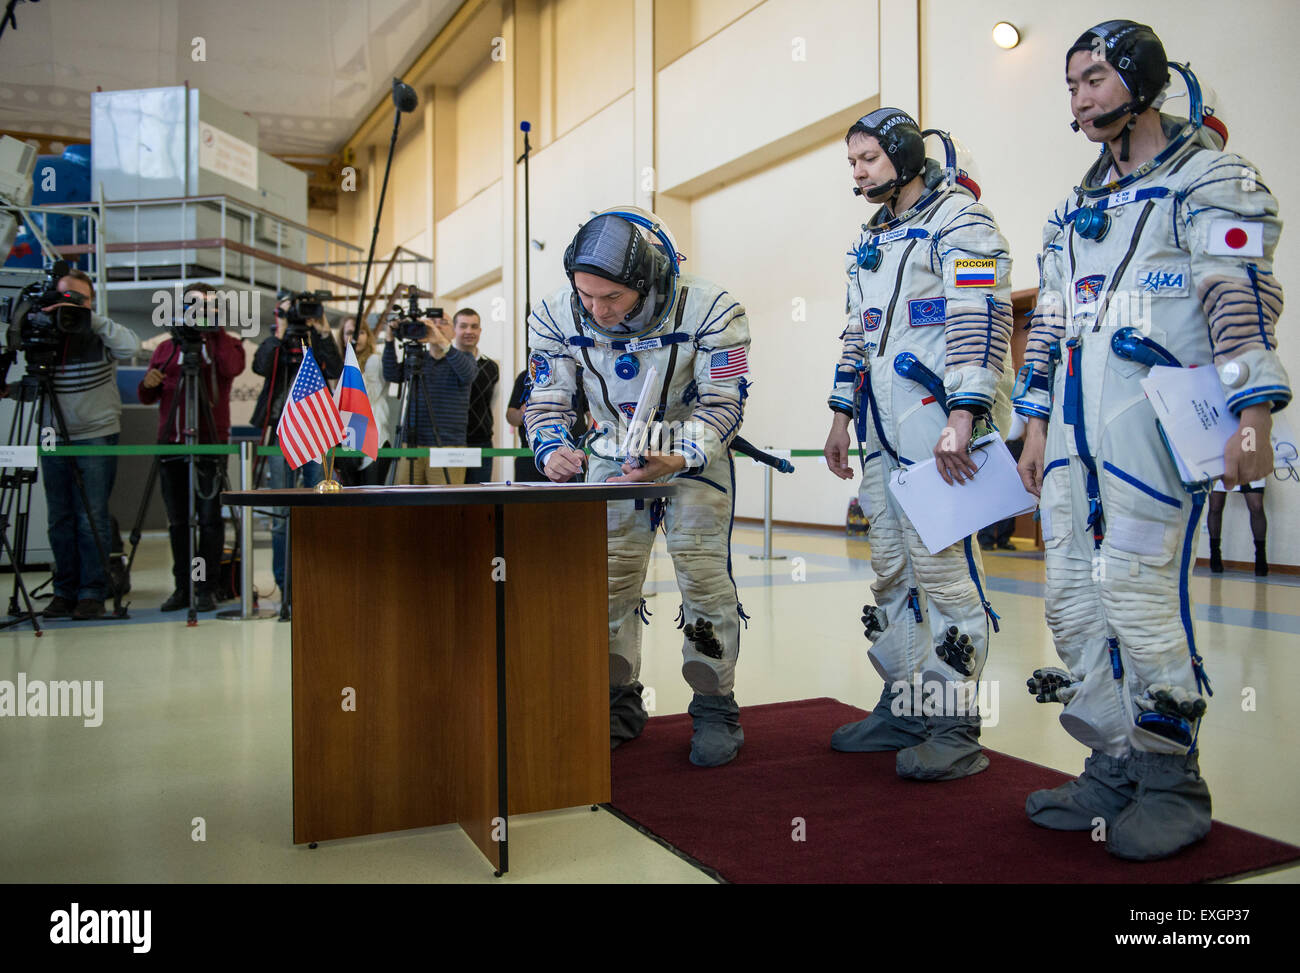 NASA astronaut Kjell Lindgren, left, Russian cosmonaut Oleg Kononenko, center, and Japan Aerospace Exploration Agency astronaut Kimiya Yui participate in the second day of qualification exams, Thursday, May 7, 2015 at the Gagarin Cosmonaut Training Center (GCTC) in Star City, Russia. The Expedition 44/45 trio is preparing for launch to the International Space Station in their Soyuz TMA-17M spacecraft from the Baikonur Cosmodrome in Kazakhstan. Stock Photo